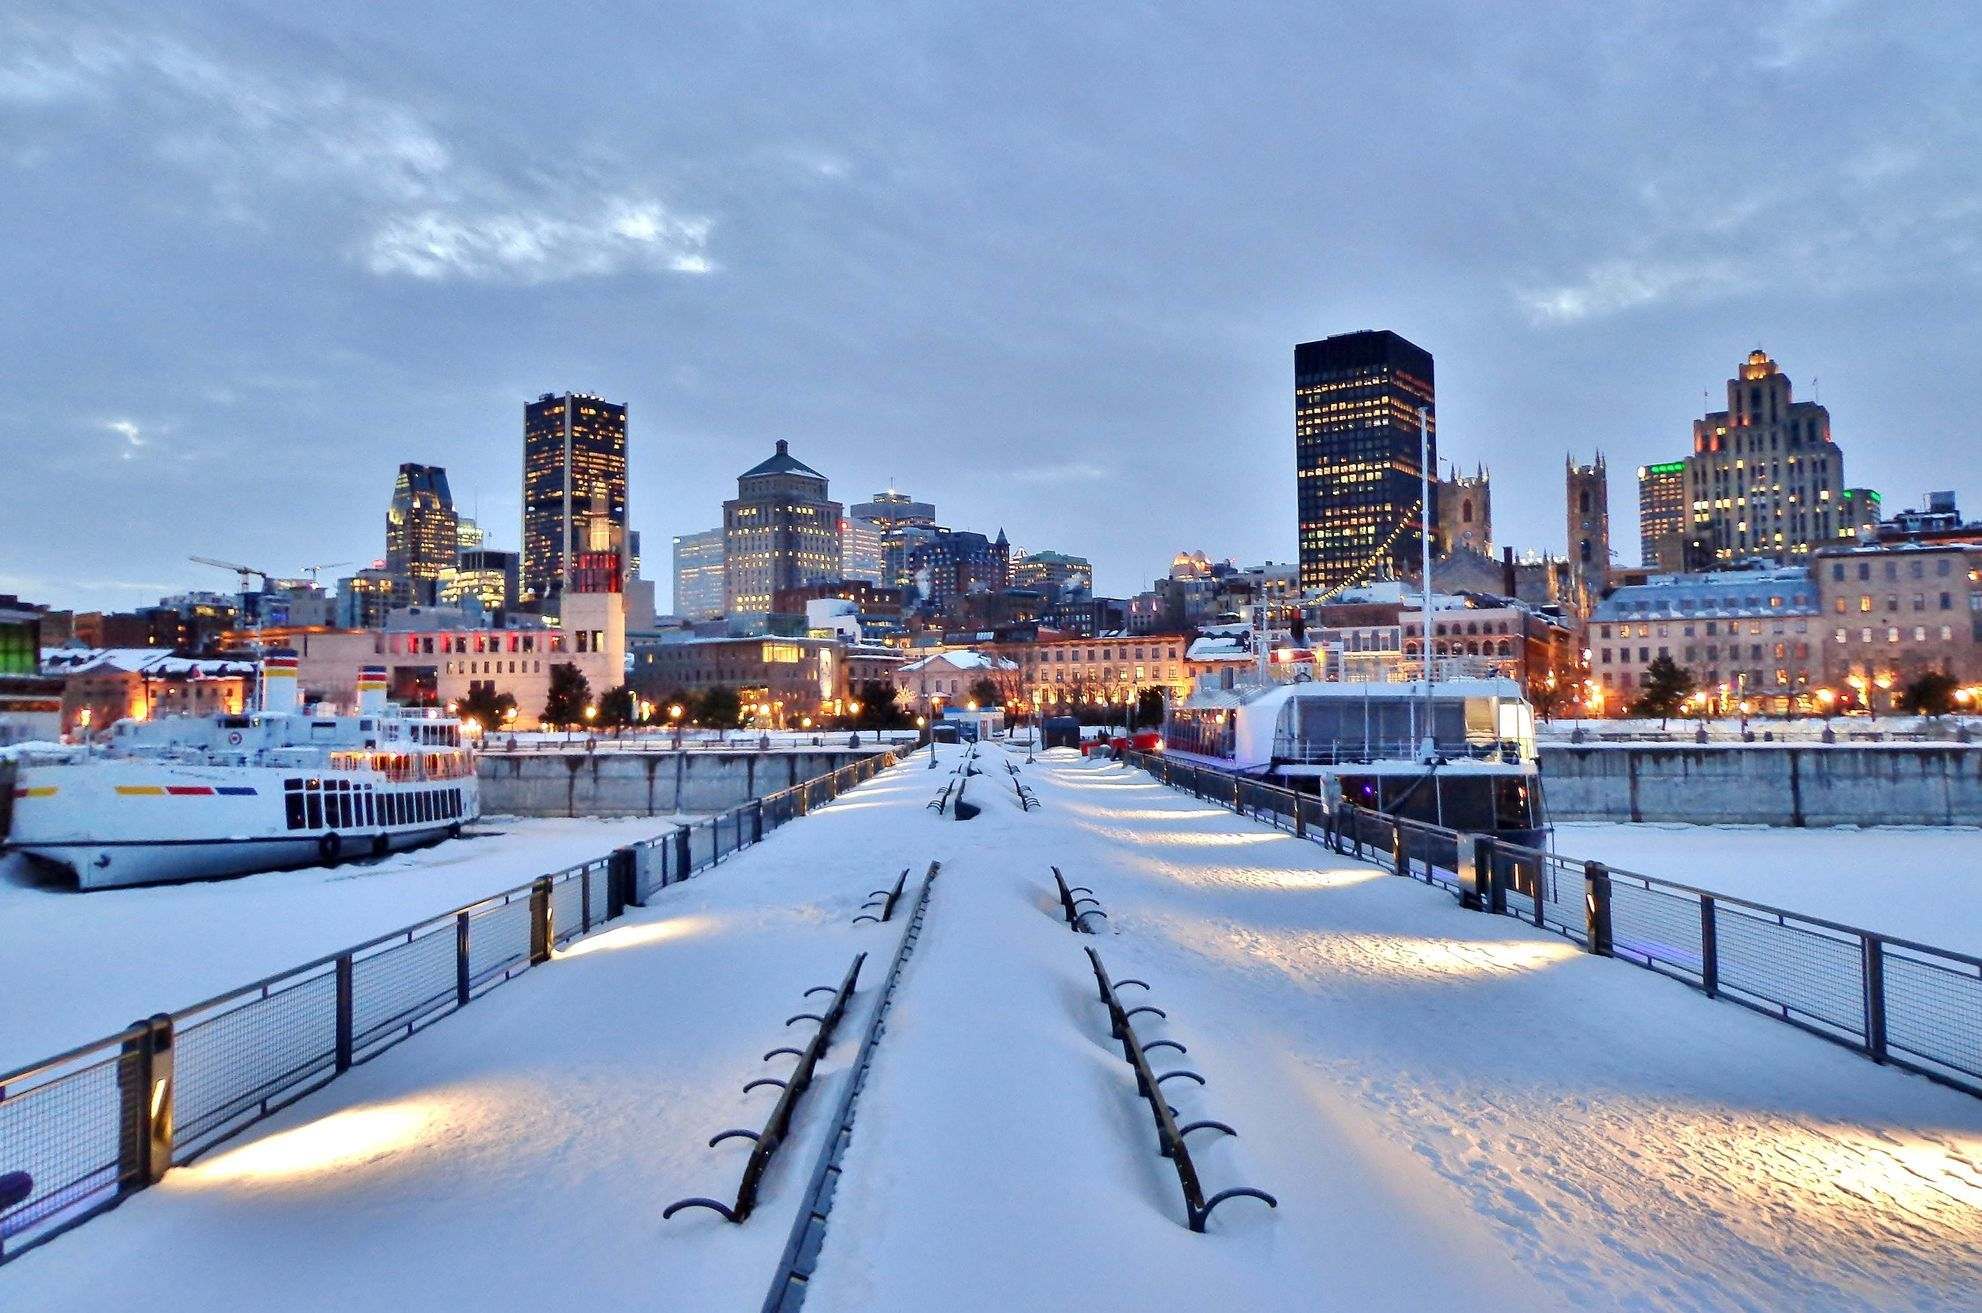 Montreal during the winter